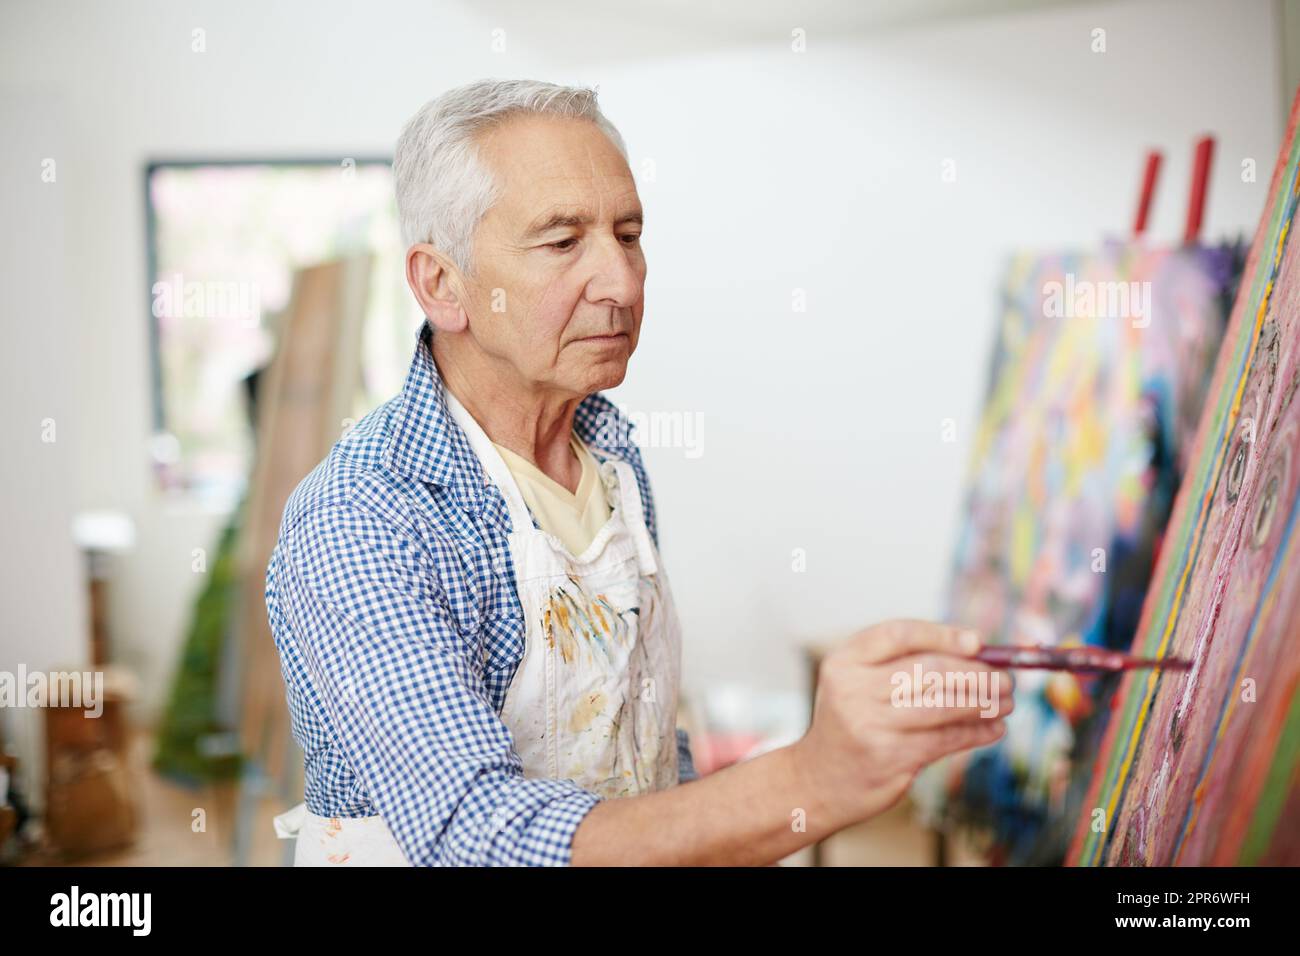 The creative adult is the child who survived. Shot of a senior man working on a painting at home. Stock Photo